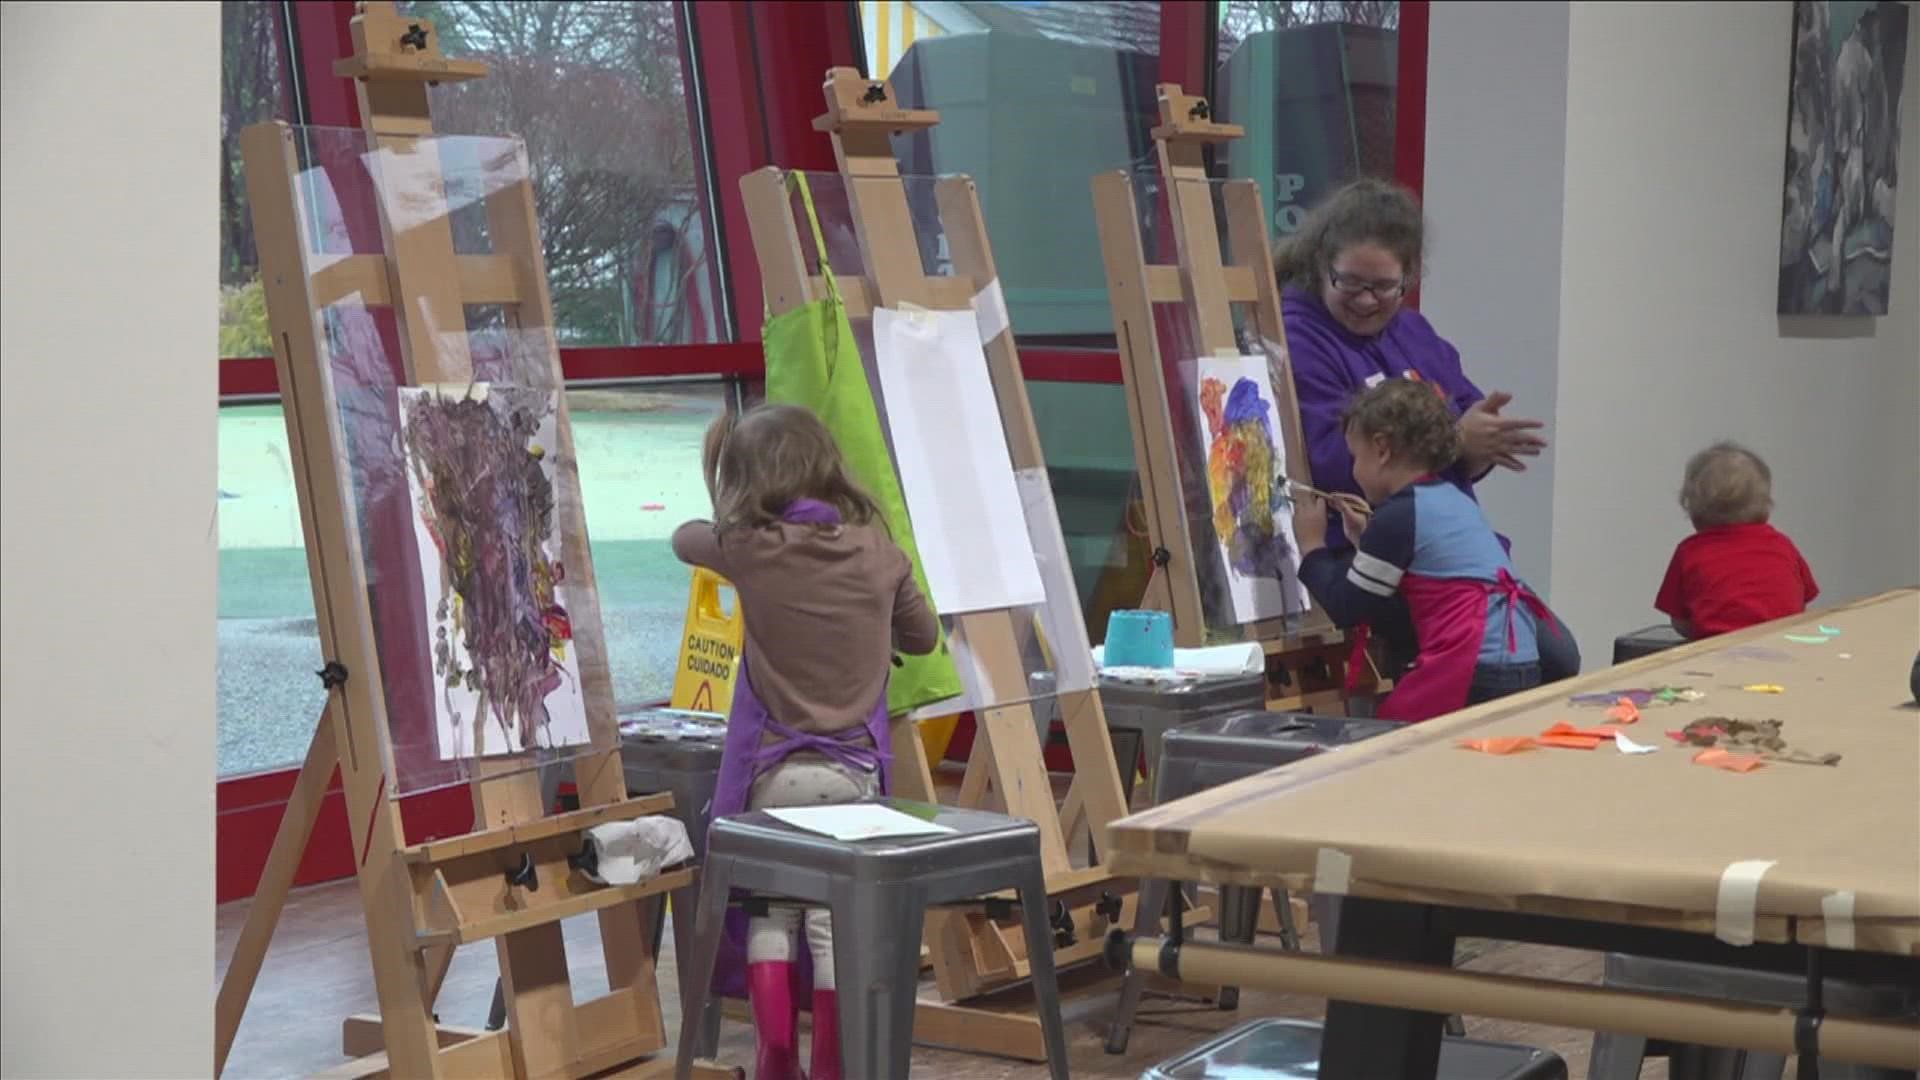 This week, the Children’s Museum of Memphis is highlighting the 'real you' with art.